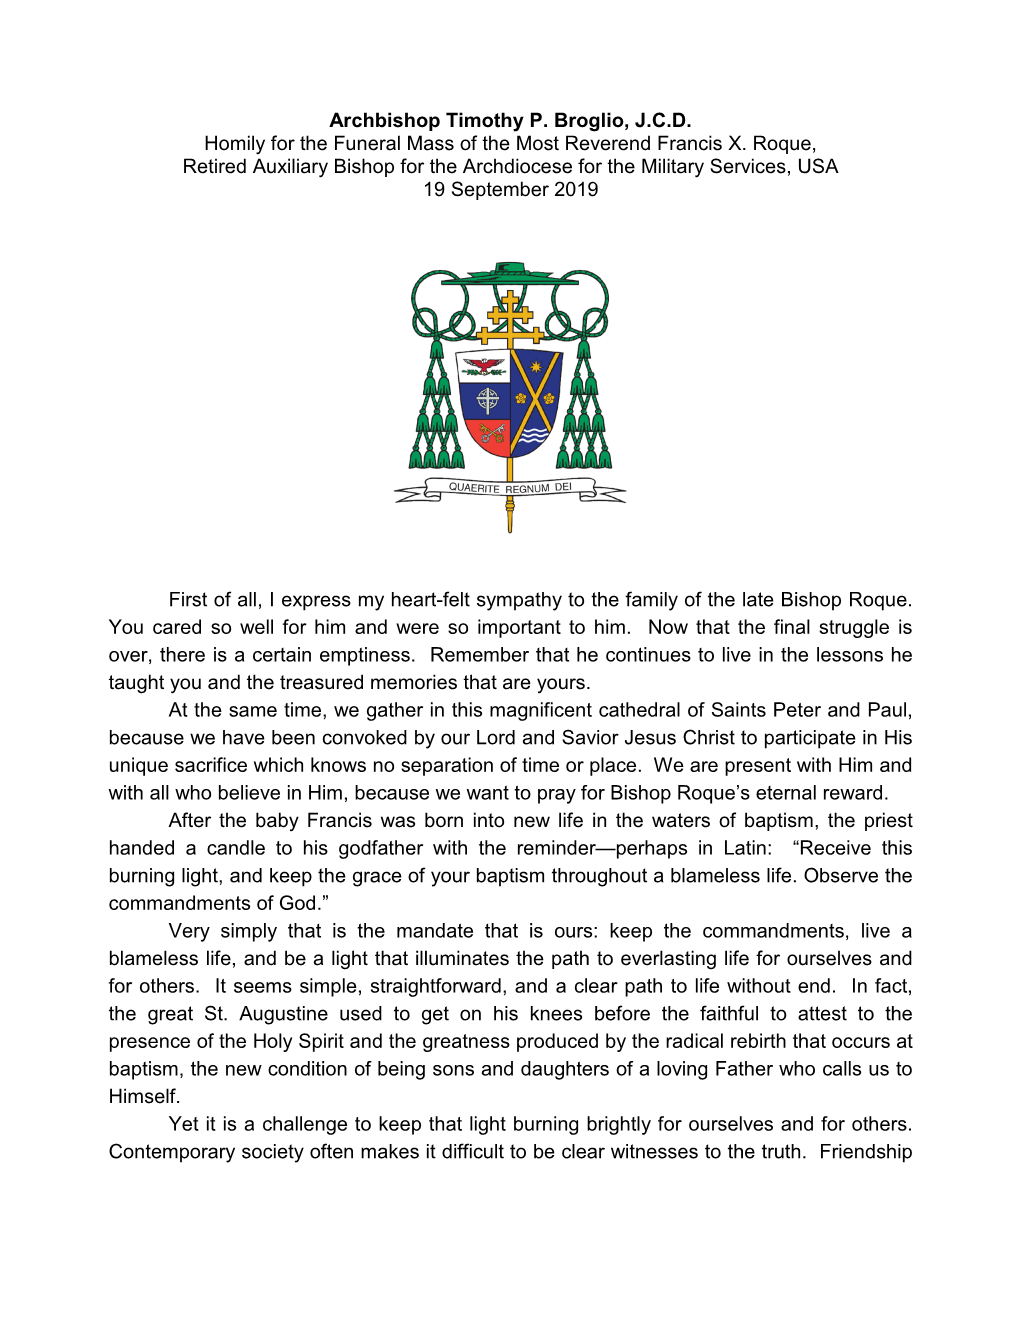 Archbishop Timothy P. Broglio, J.C.D. Homily for the Funeral Mass of the Most Reverend Francis X